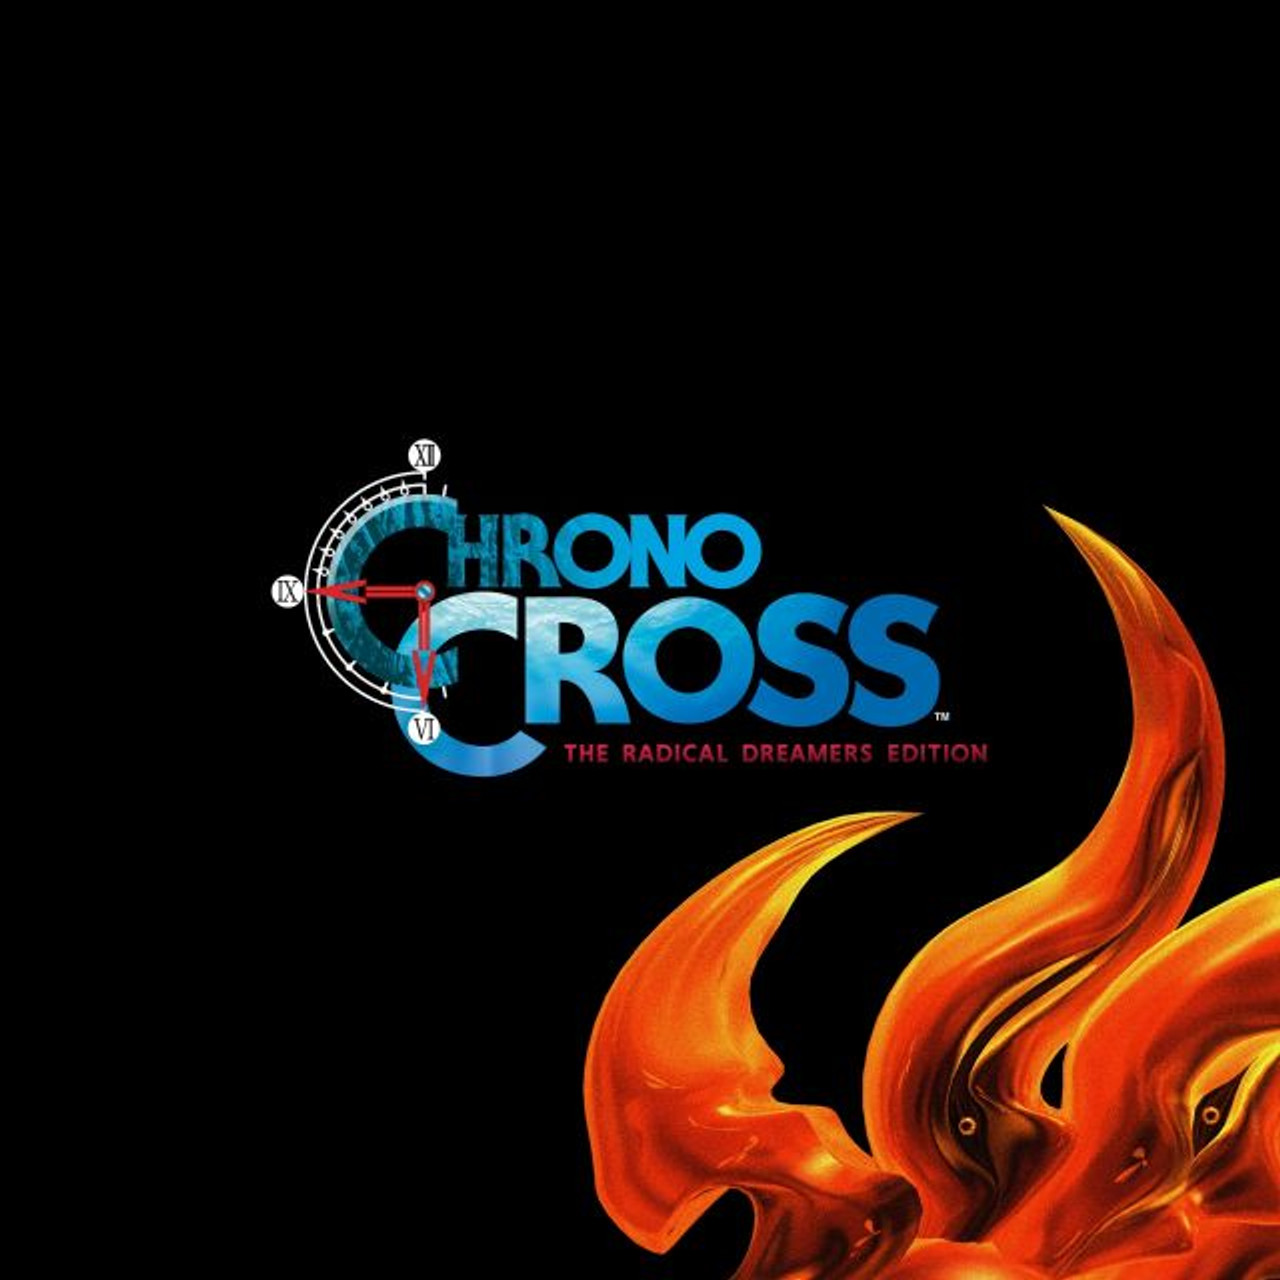 Chrono Cross: The Radical Dreamers Edition is coming in April